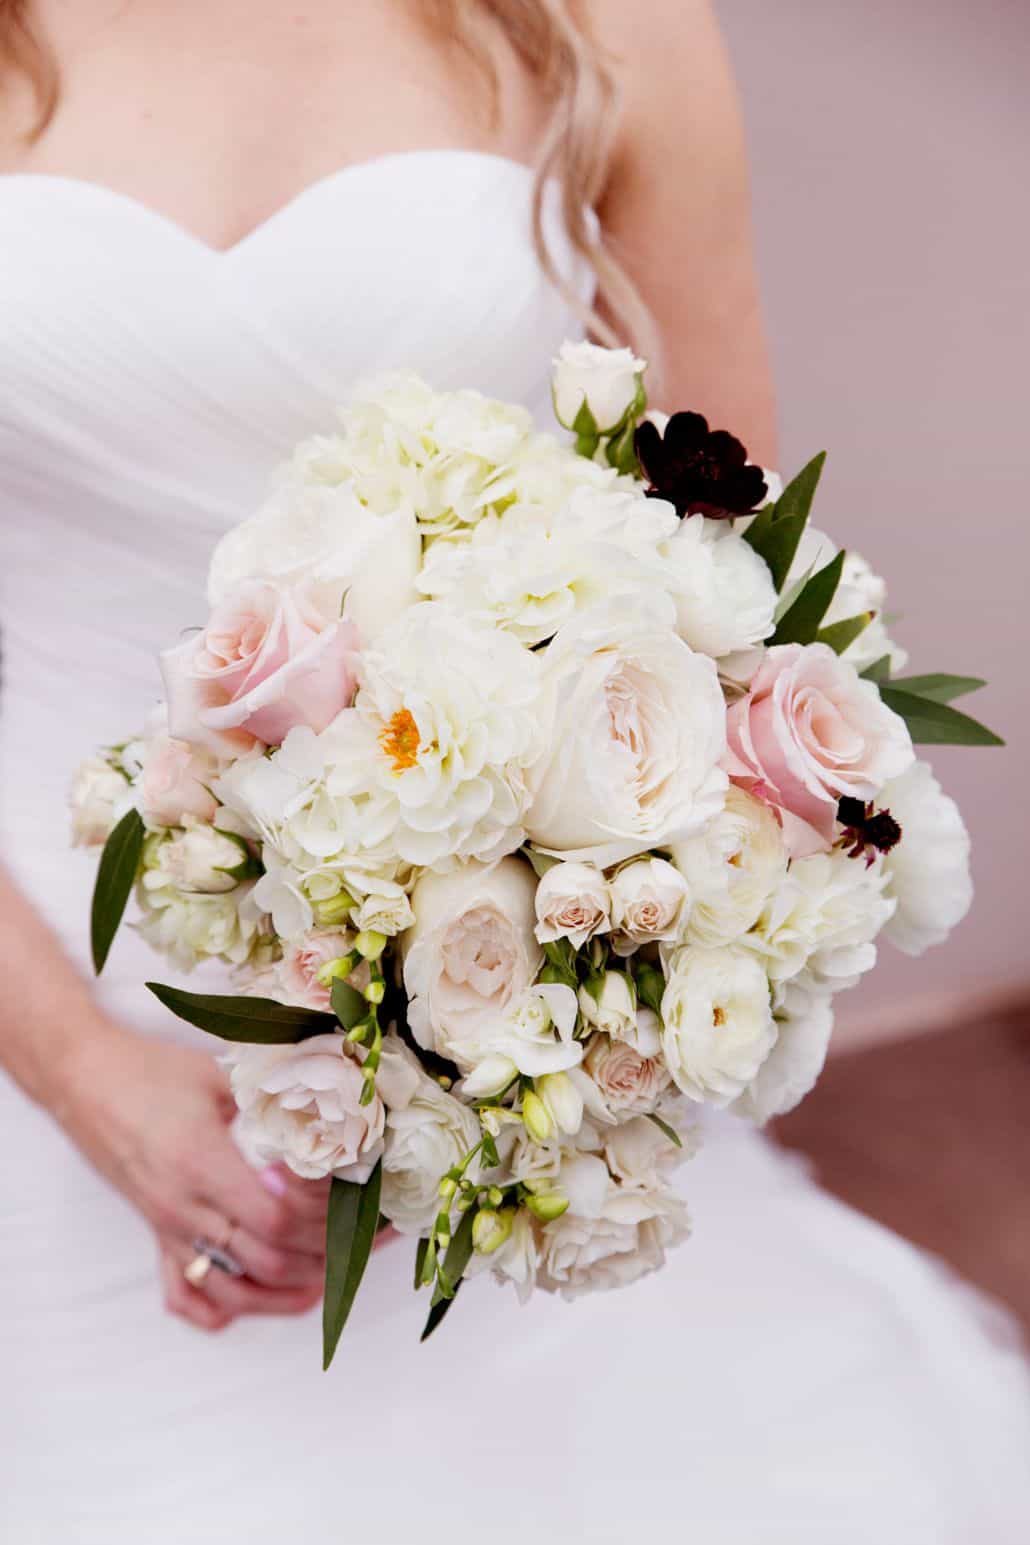 Bride Holds Large Pale Pink And White Wedding Bouquet With Dark Green Leaf Accents Roses Zinnias Hydrangea Kyo Morishima Photography